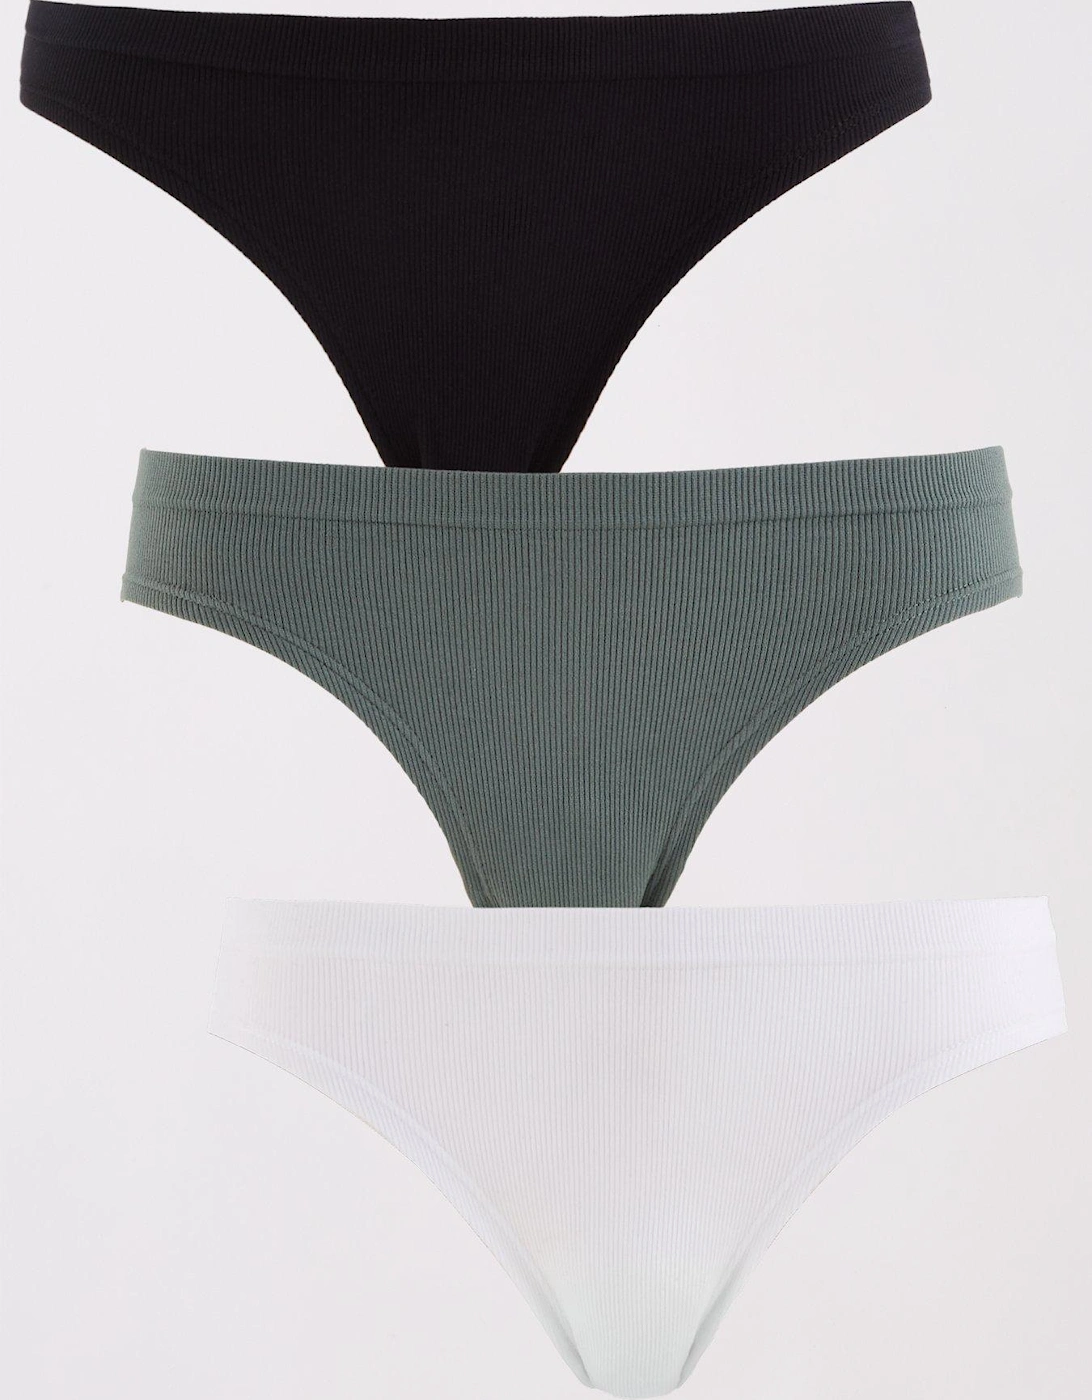 Flo 3 pack Brief - Blk/Green/White, 5 of 4